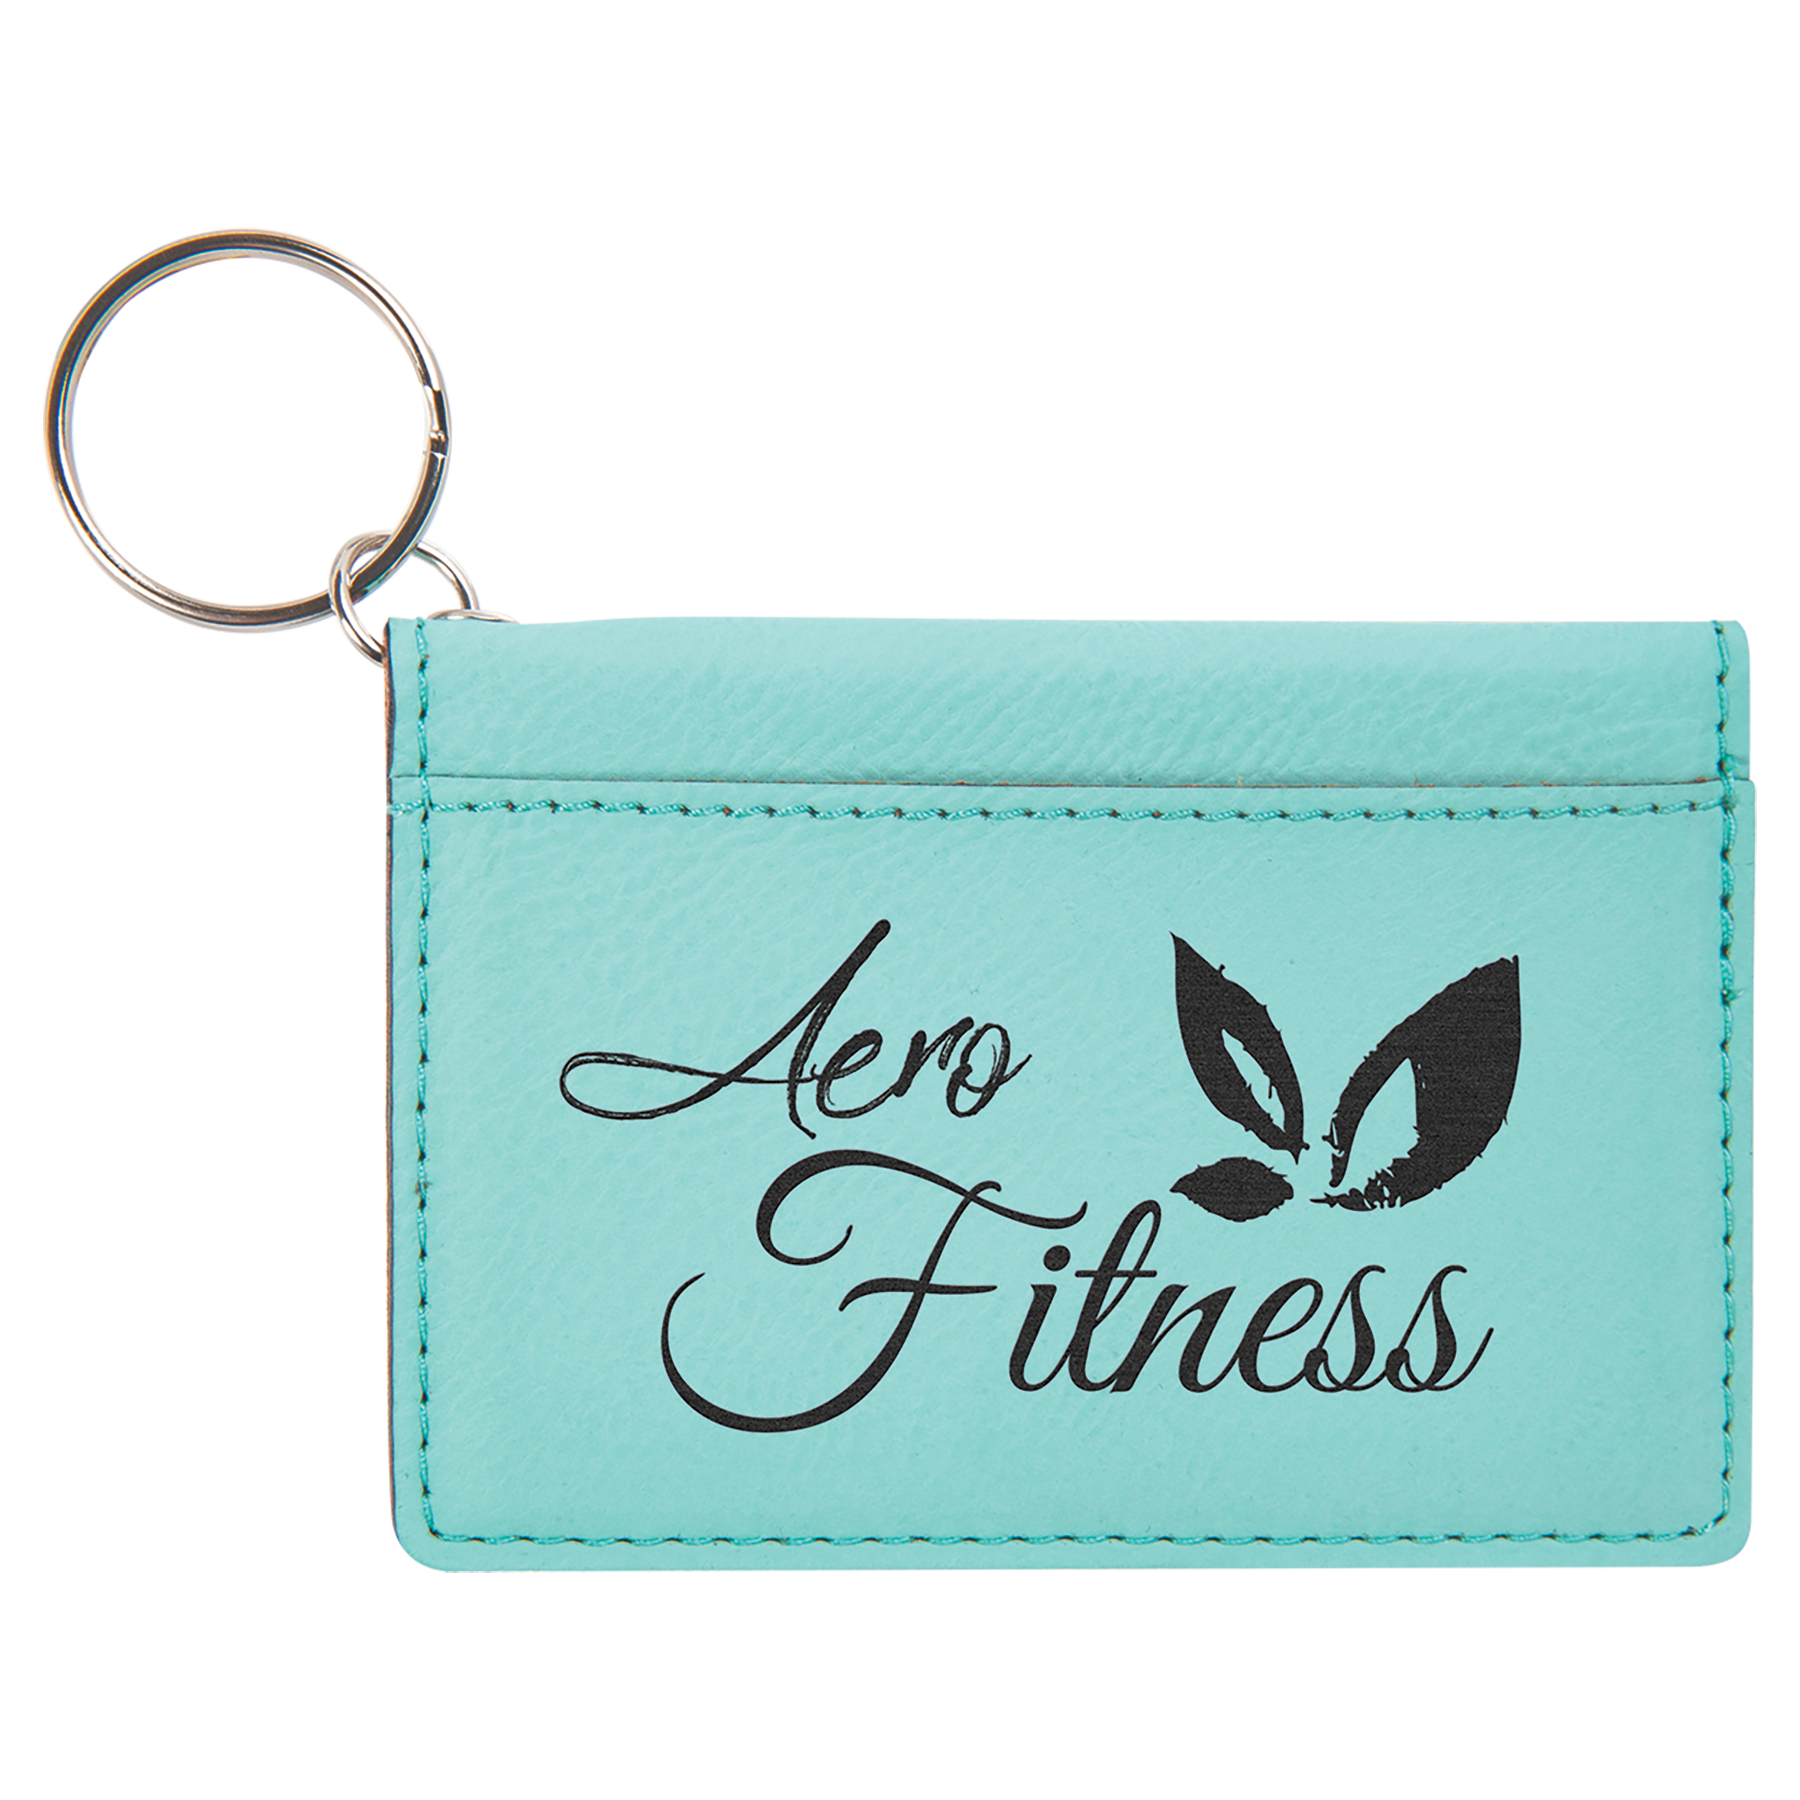 Leatherette Double ID Holder w/Key Ring